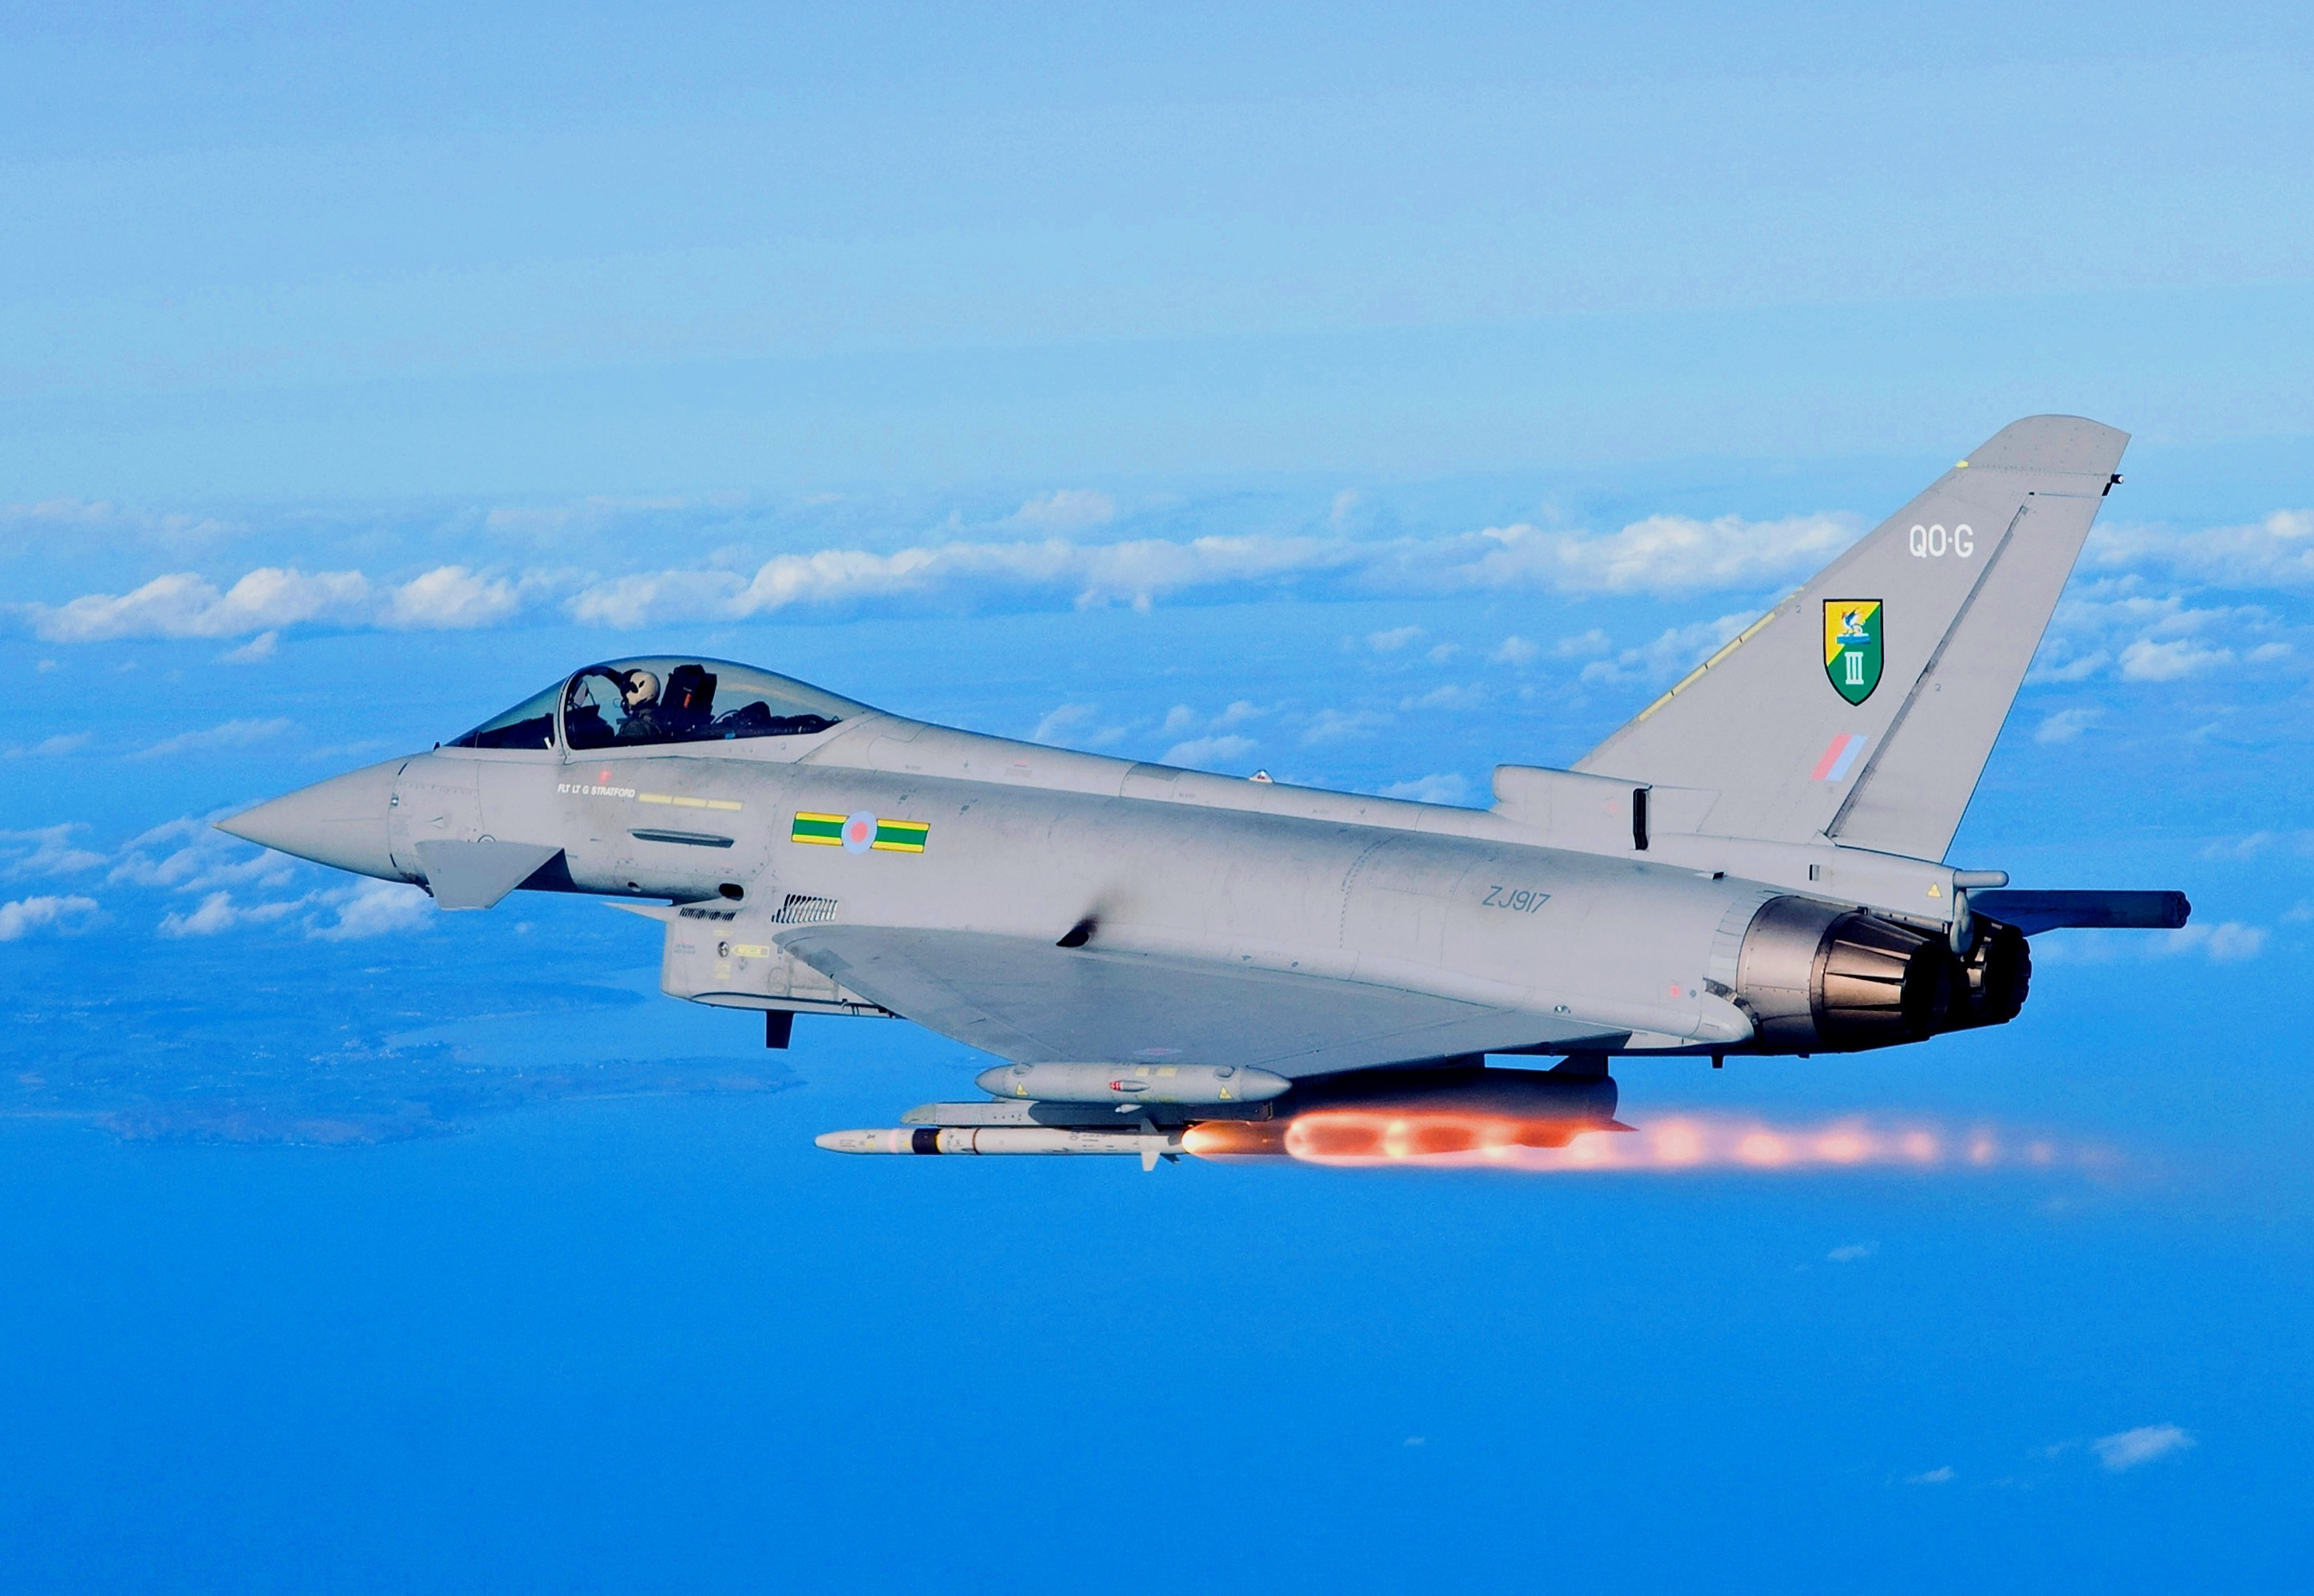 Wallpapers clouds eurofighter fighter on the desktop